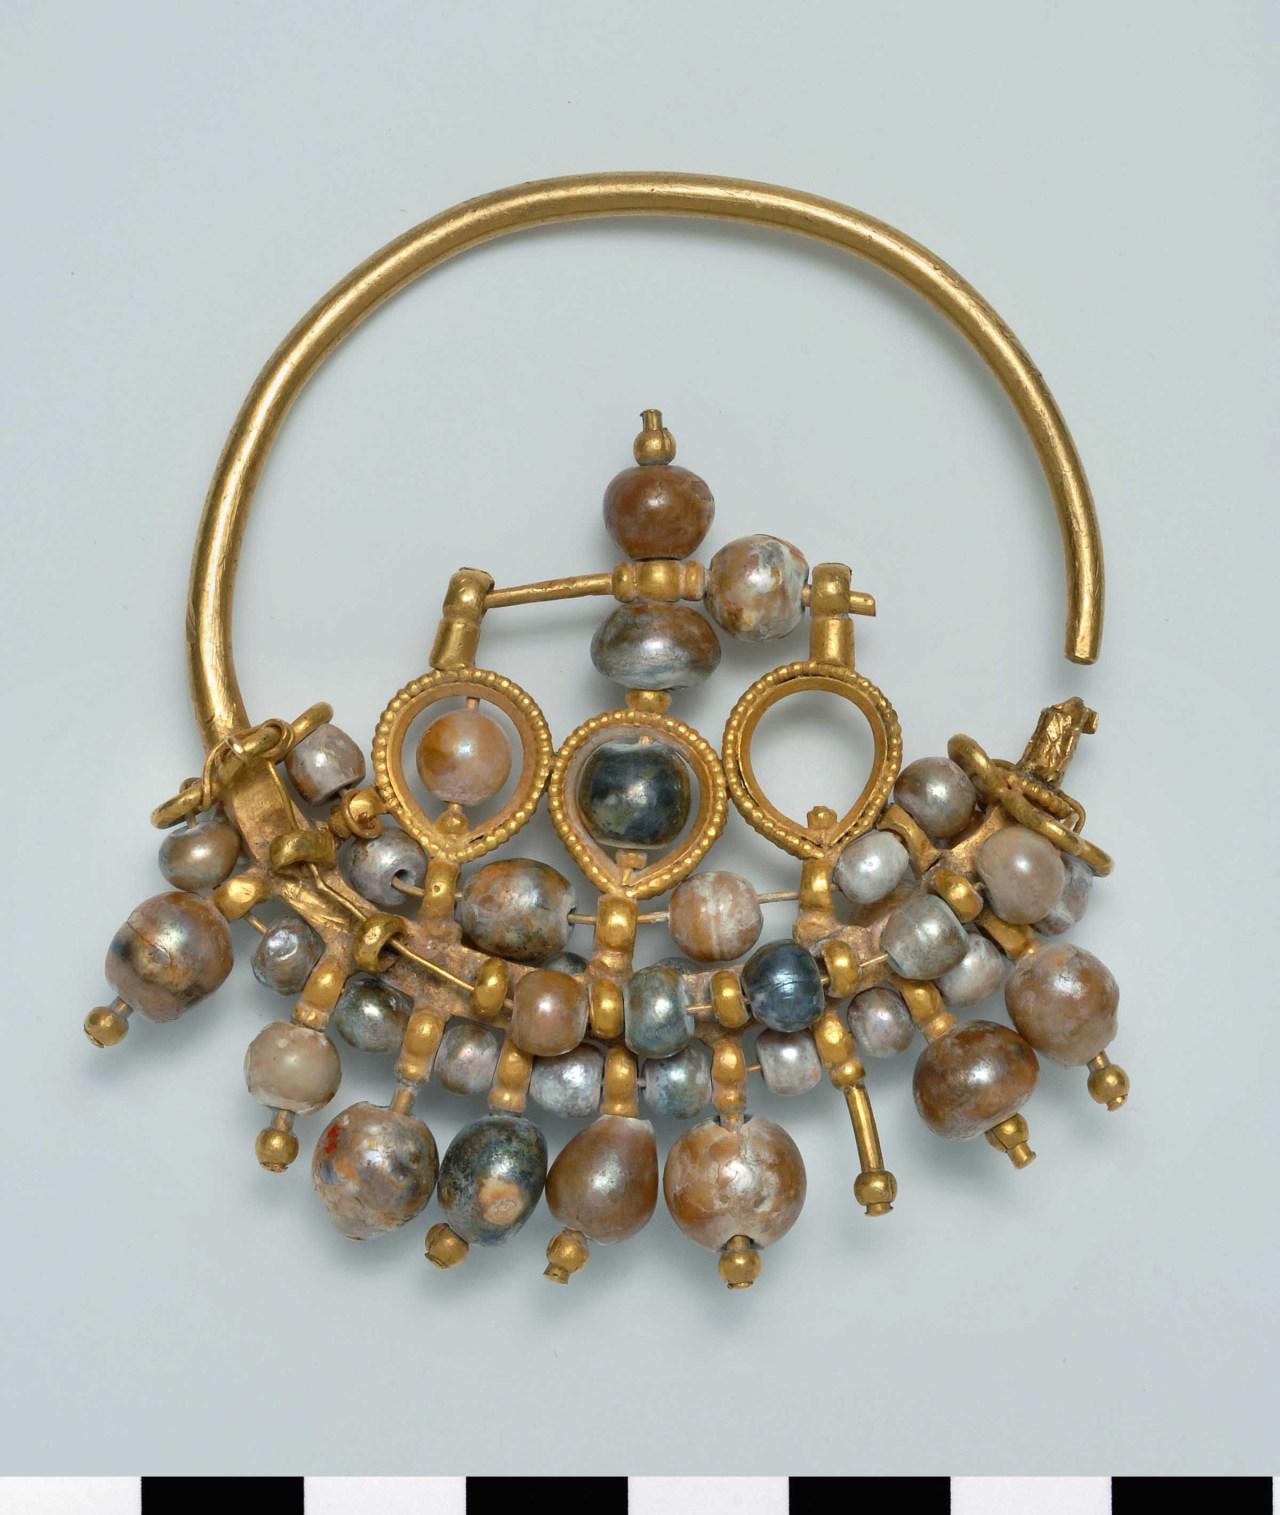 Byzantine Gold and pearl earring, 10th century, from Dumbarton Oaks Museum.jpg